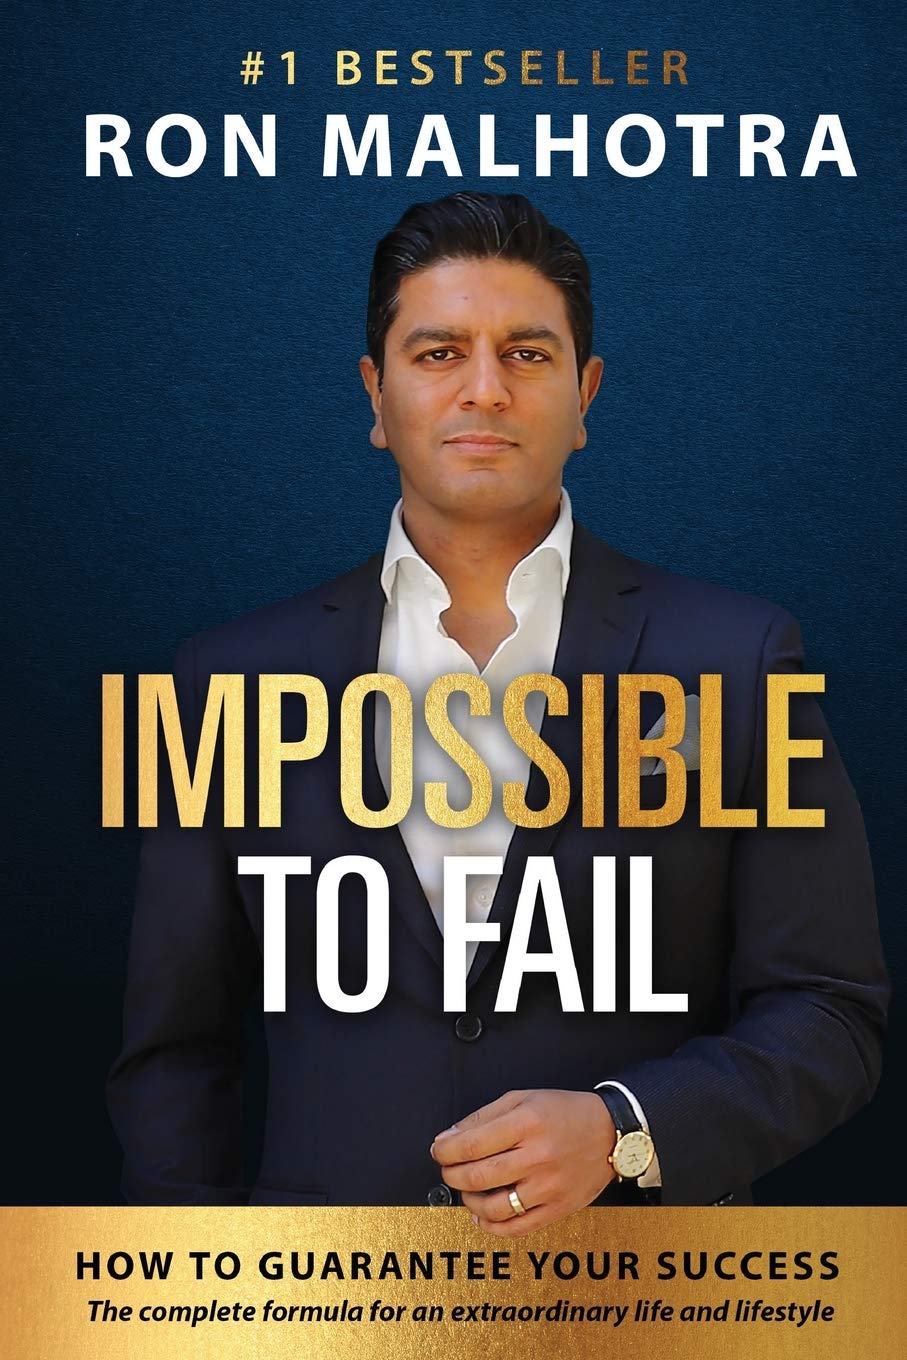 IMPOSSIBLE TO FAIL: HOW TO GUARANTEE YOUR SUCCESS